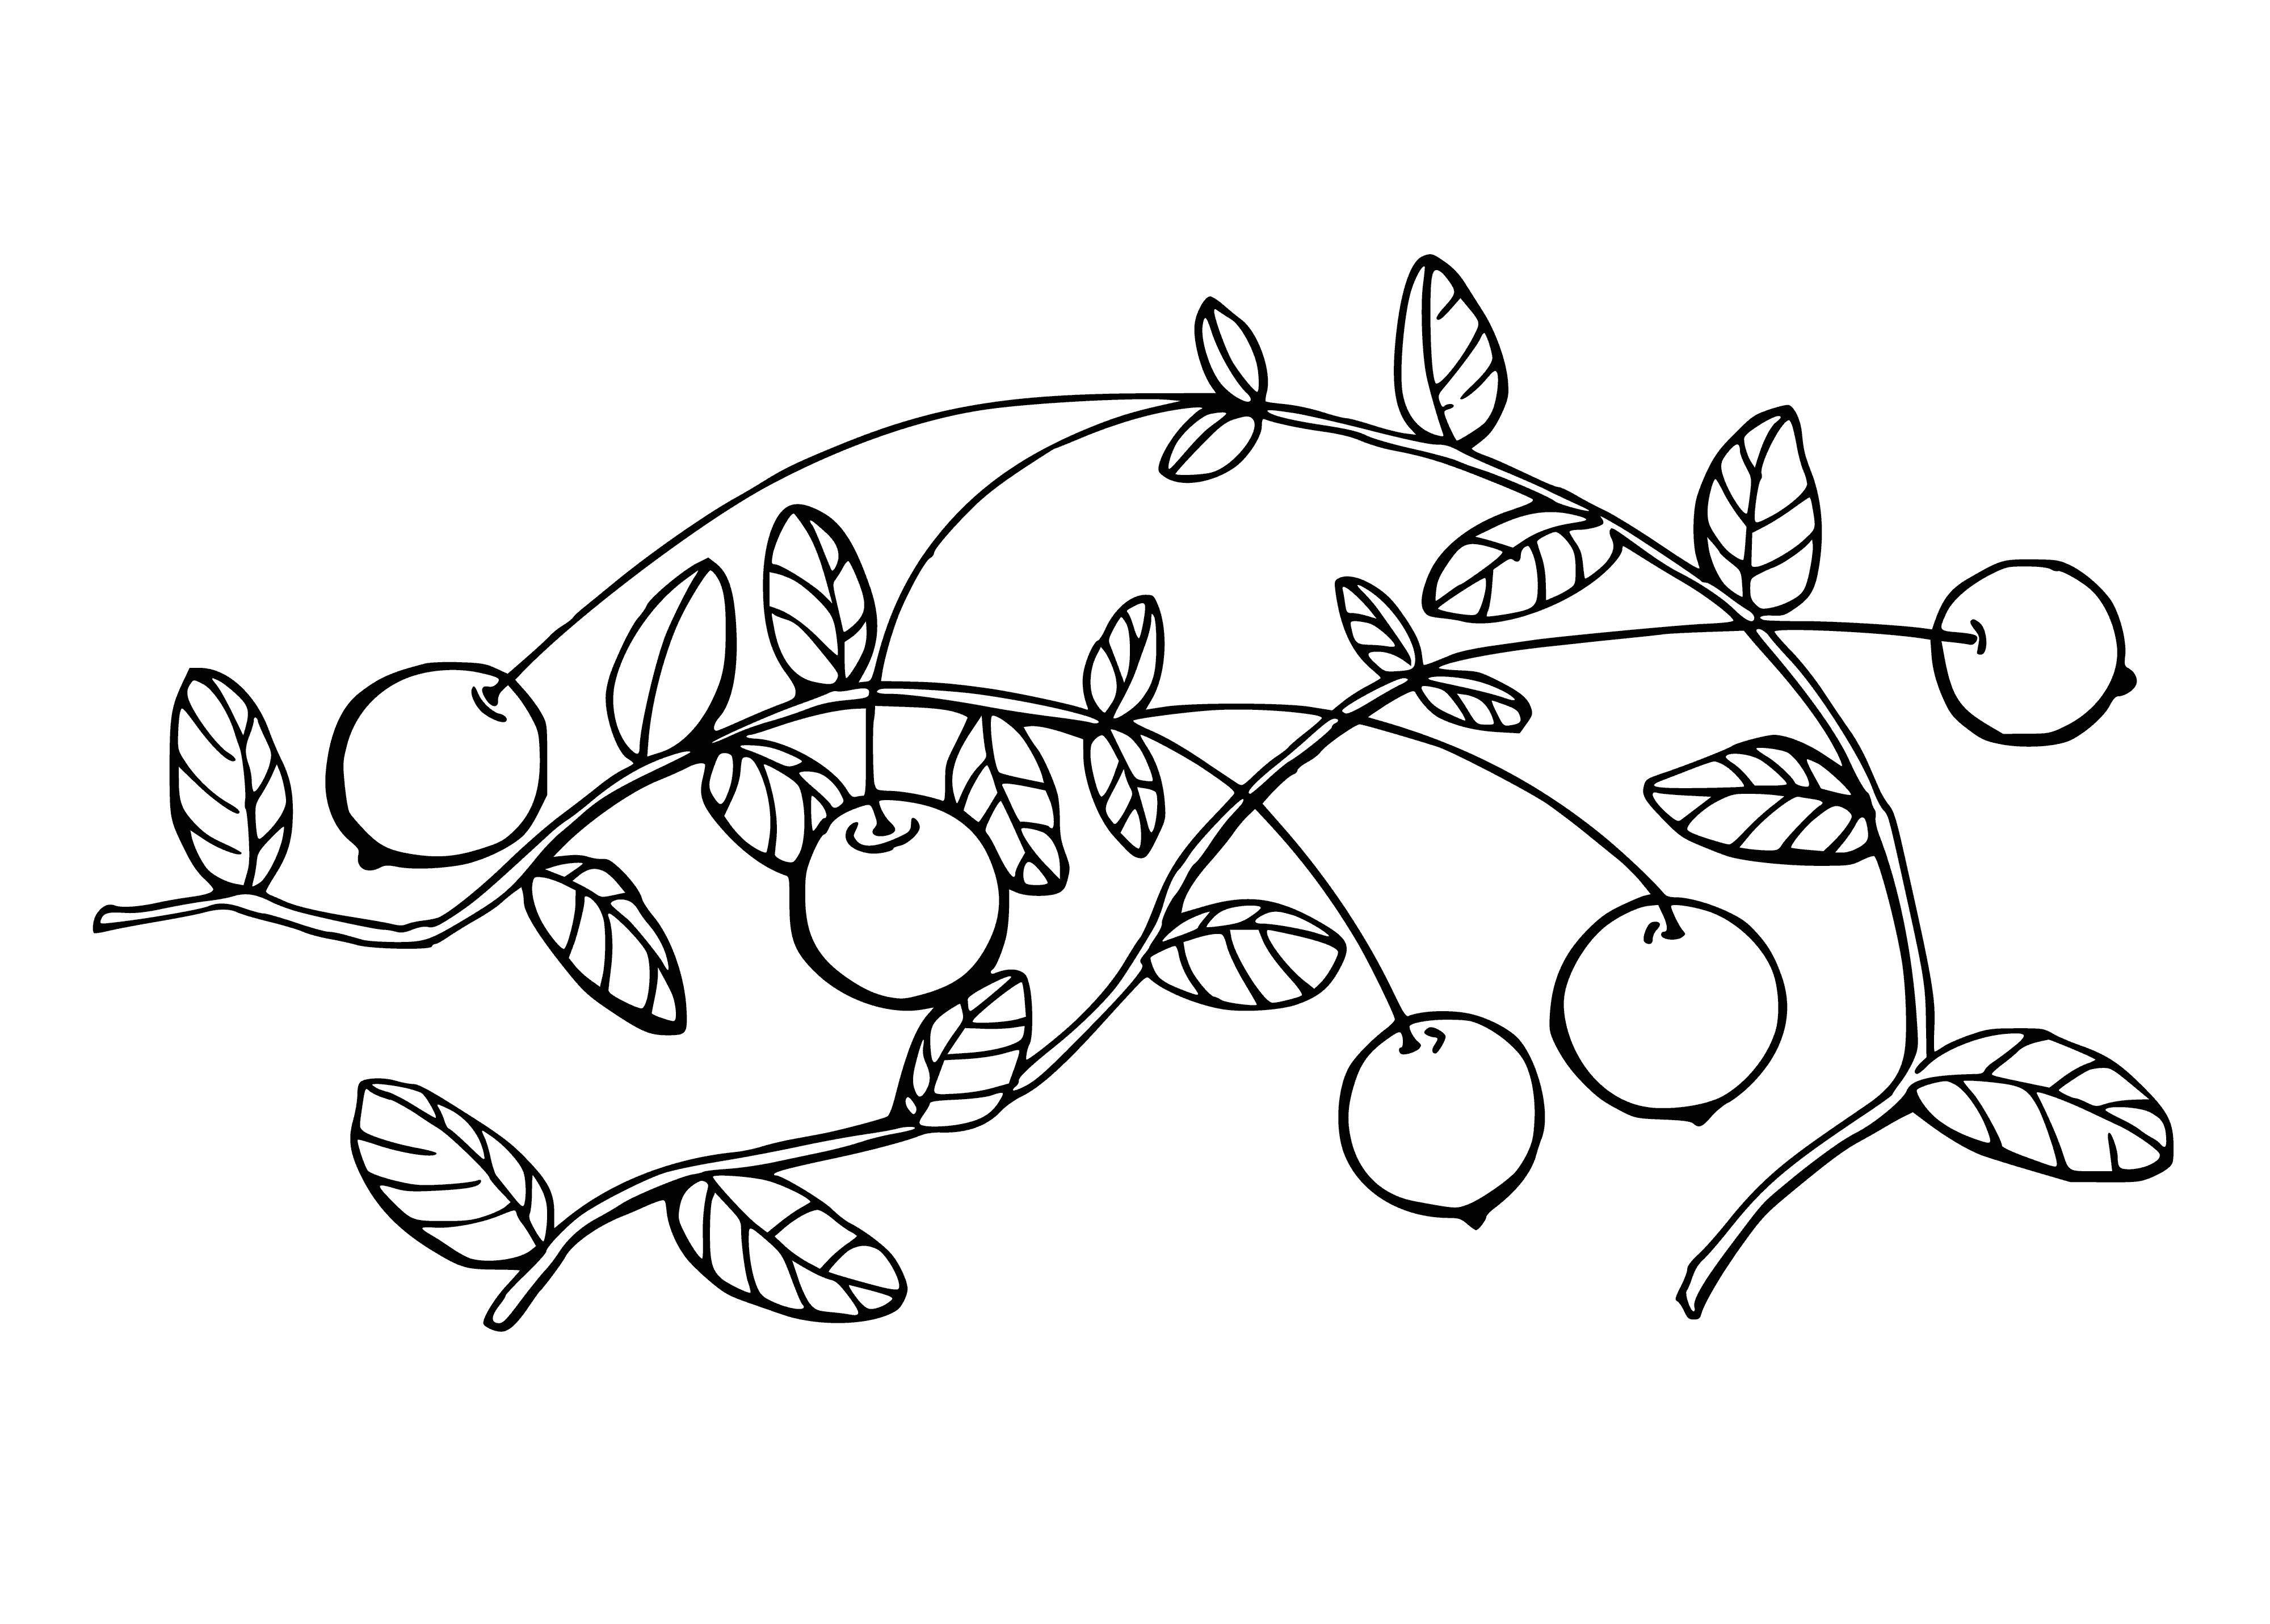 Cranberry coloring page